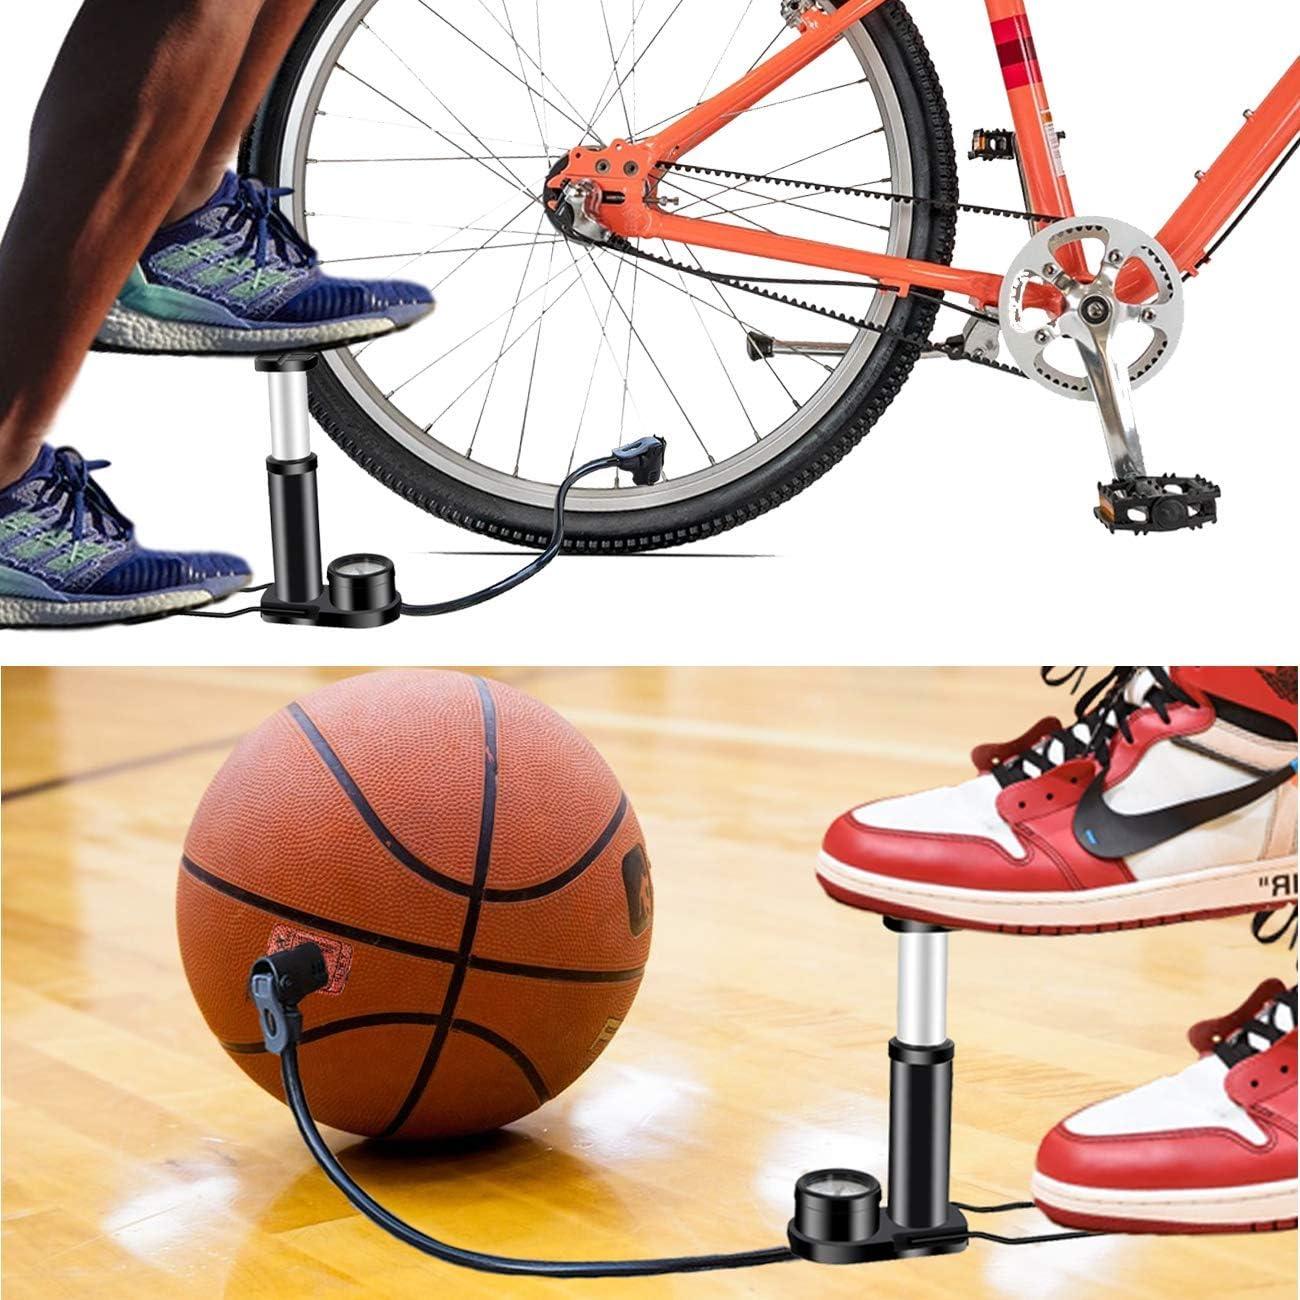 Bike Pump,Ball Pumps with Needles Portable Foot Activated Mini